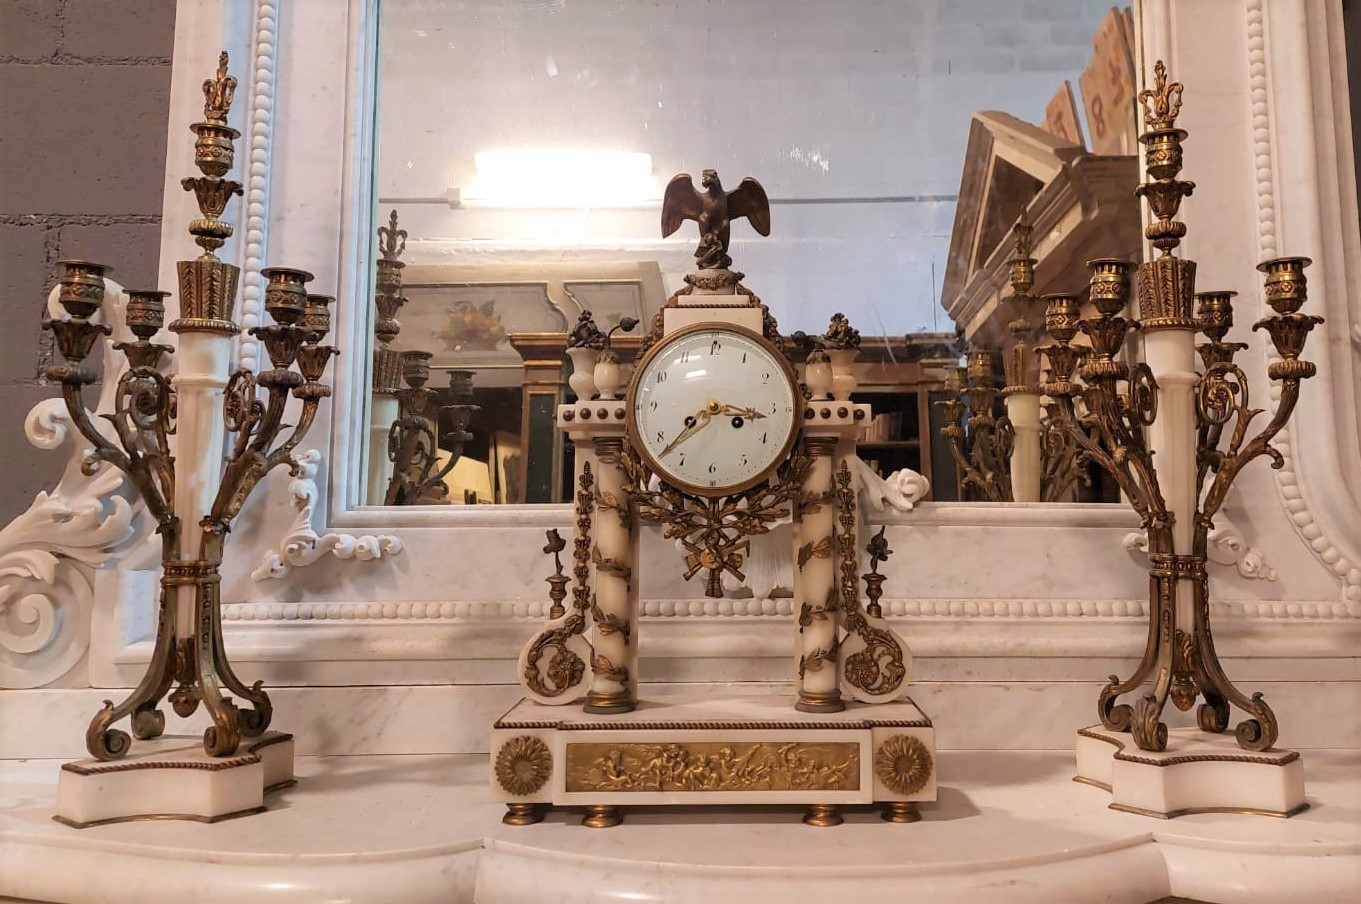 A al236 - triptych consisting of clock and candelabra, with refined sculptures